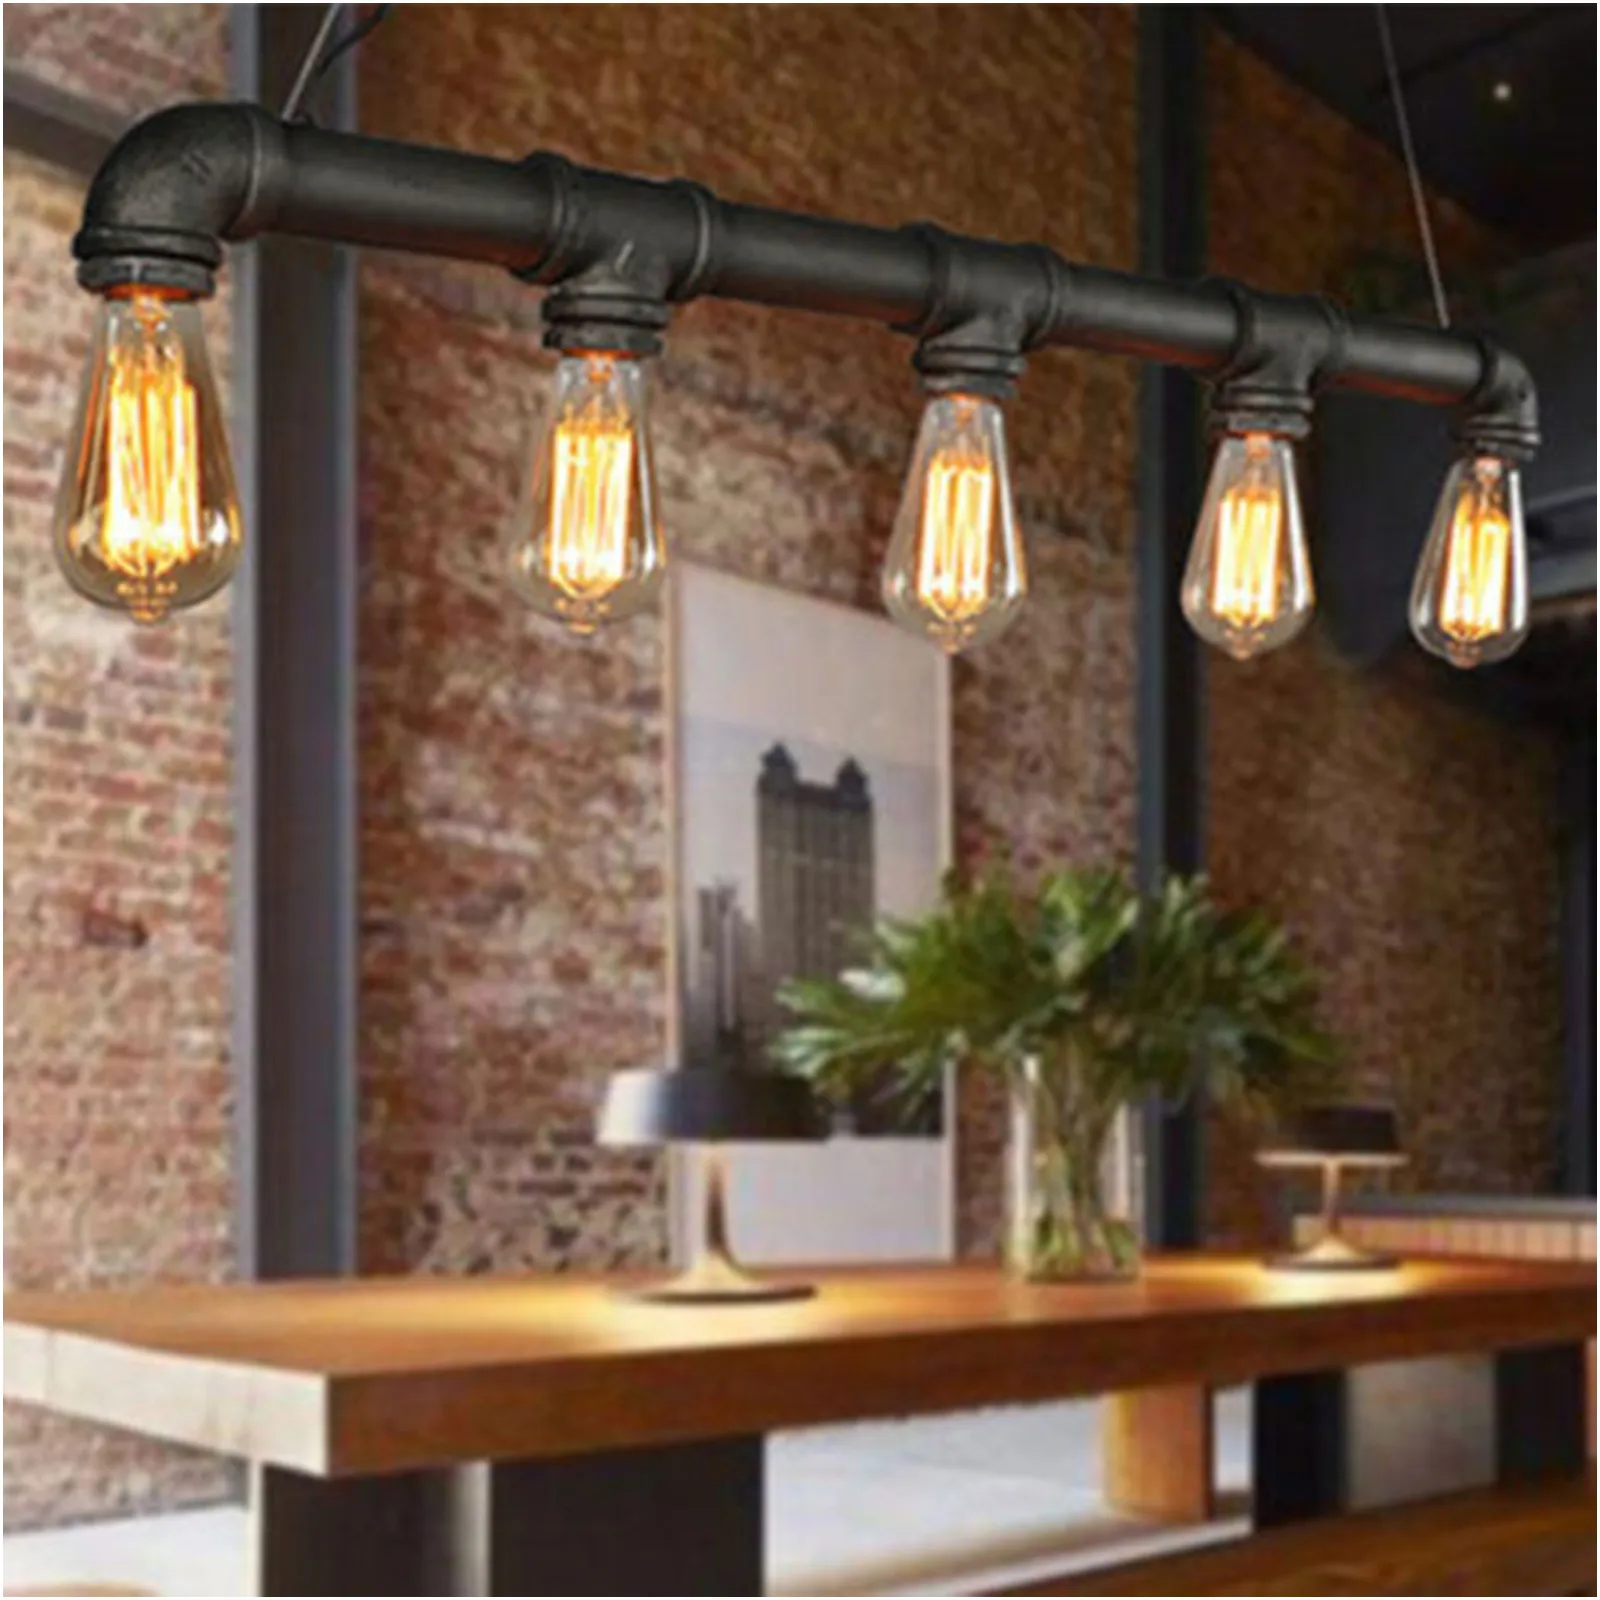 Steampunk water pipe hanging lamp pendant light indoor loft cafe decoration length 65cm thumb200